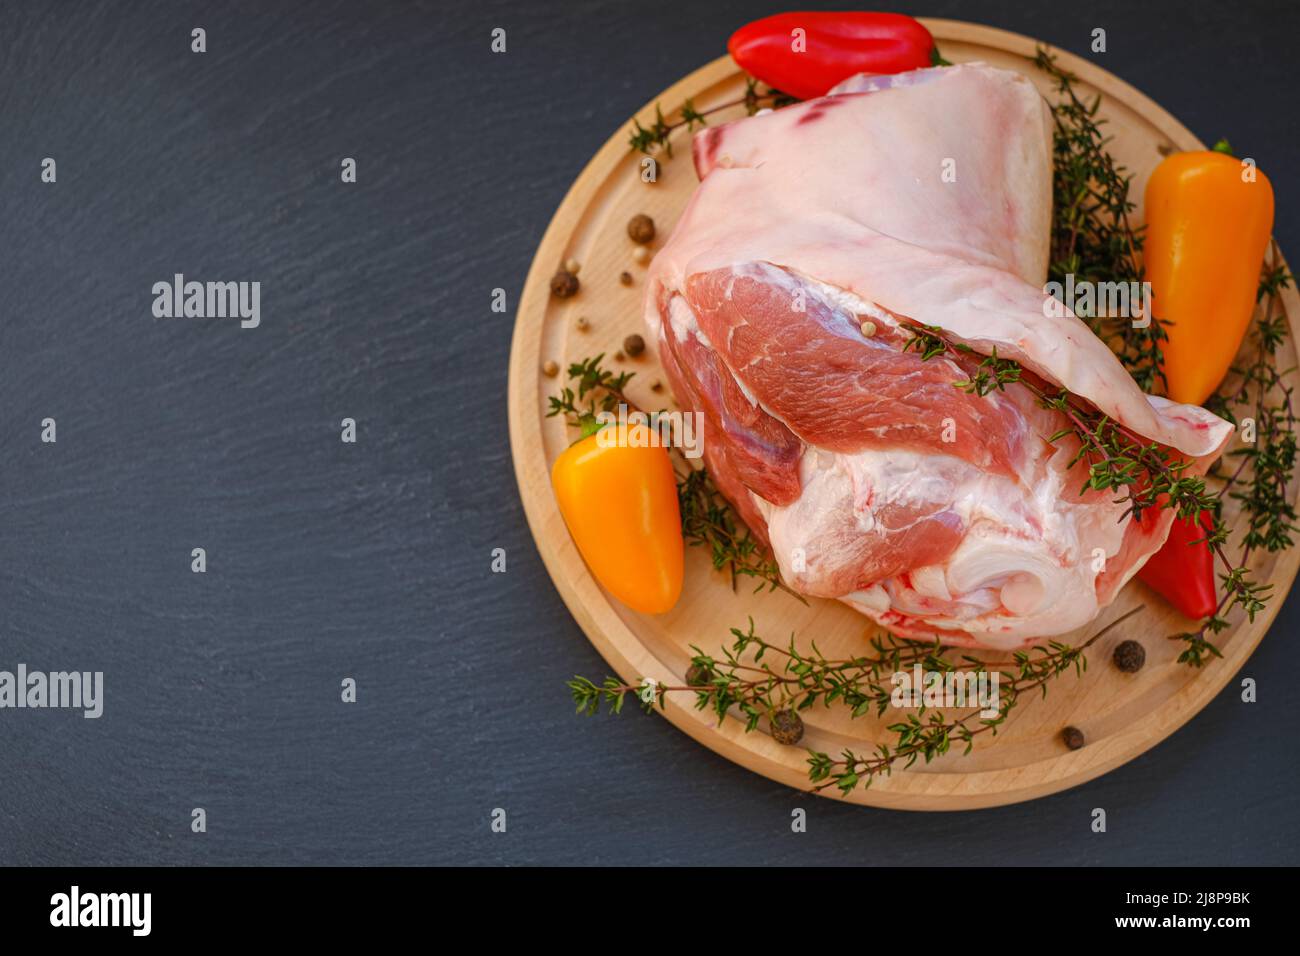 Pork meat on the bone, sweet fresh pepper and thyme herb on a wooden board on a black slate background.Meat products.Farm organic bio meat. Stock Photo